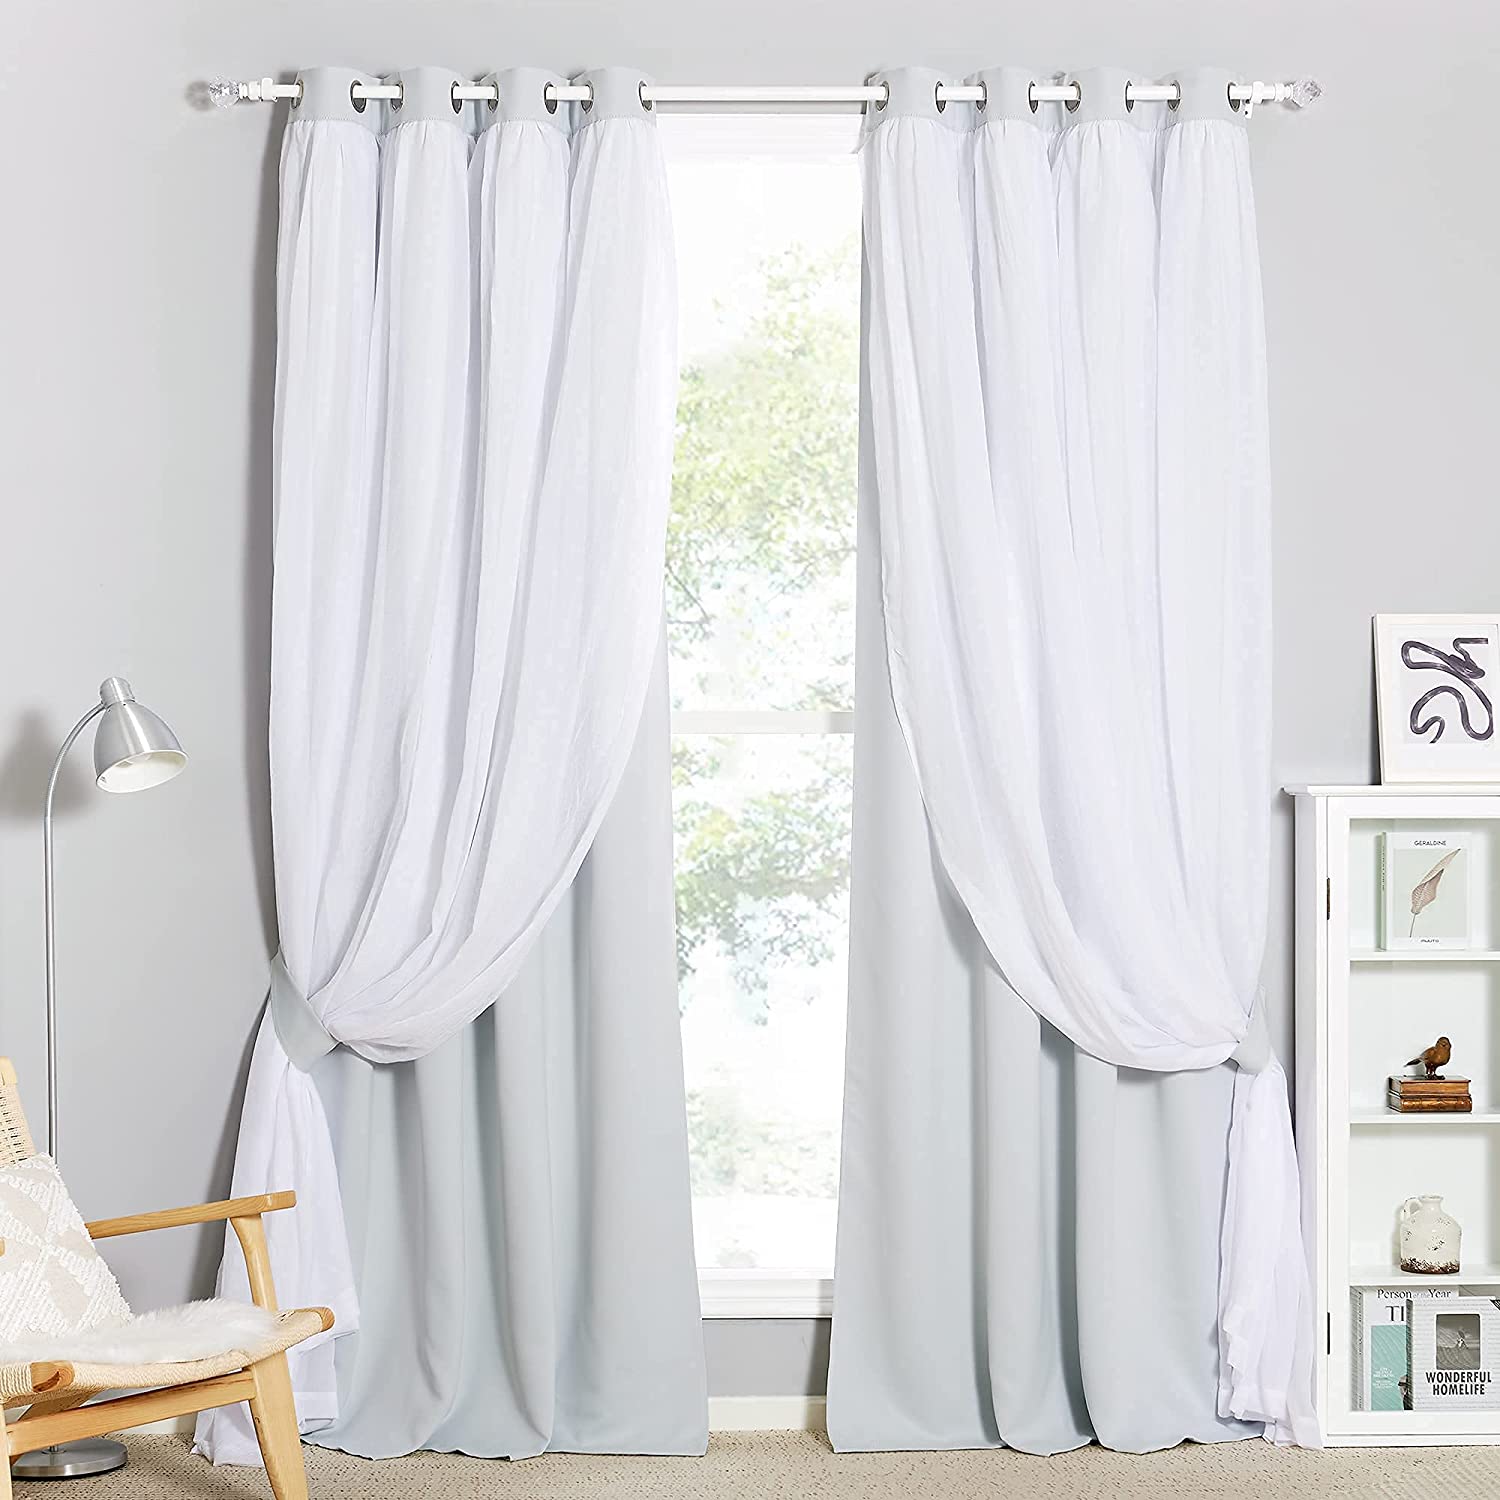 Blackout Curtains With Crushed Voile Sheer Curtain Overlay 1 Panel KGORGE Store